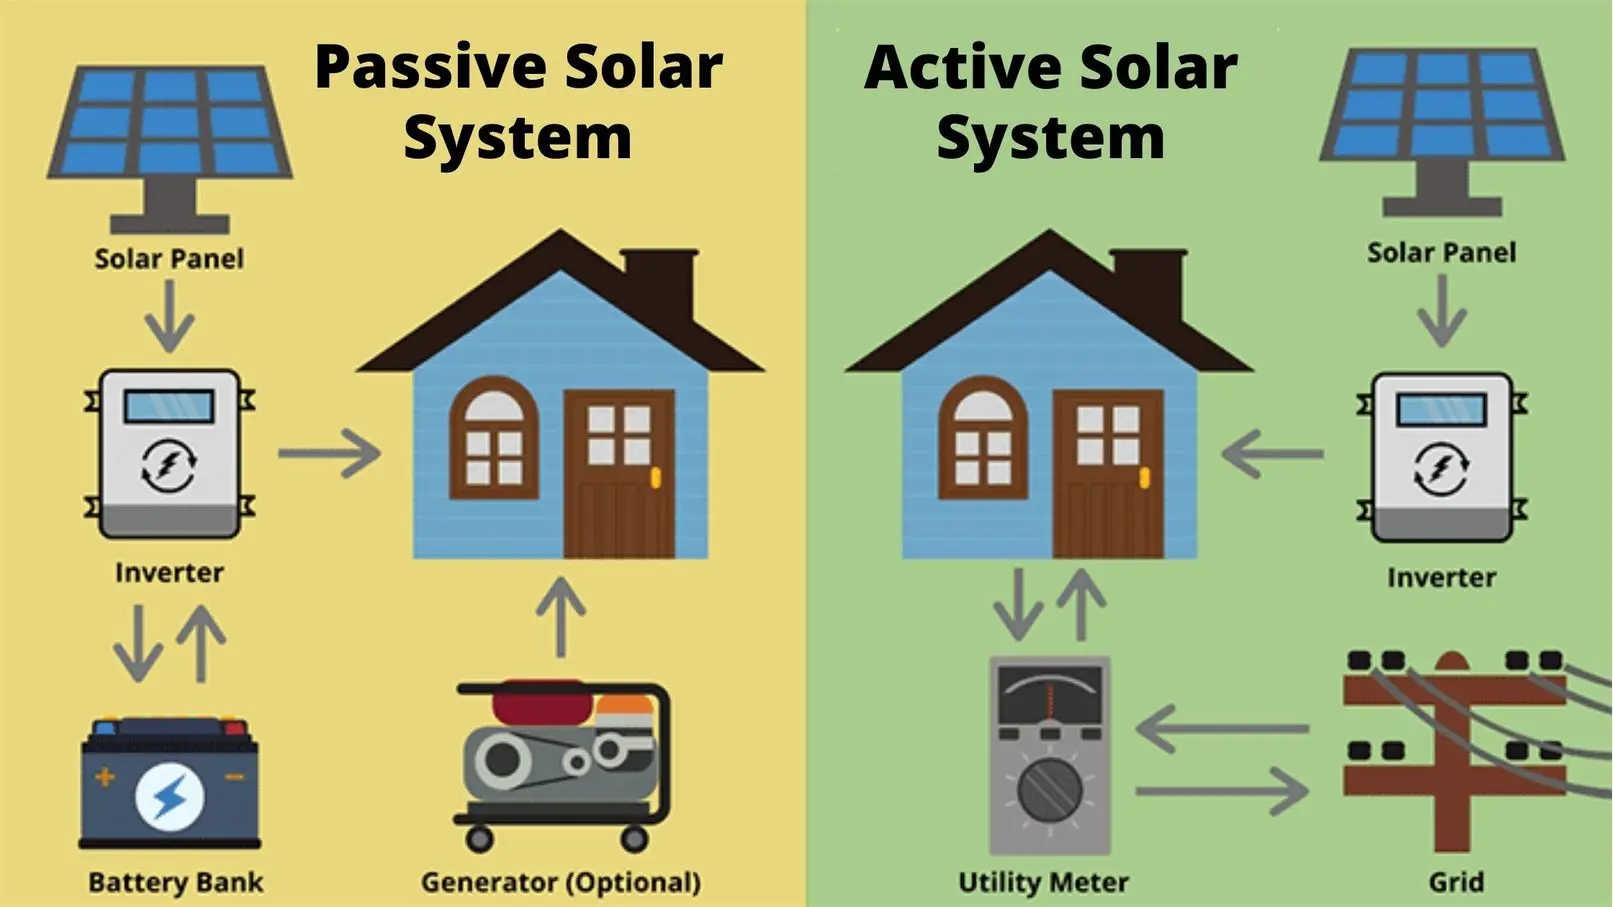 passive solar energy - What is an example of passive solar technology